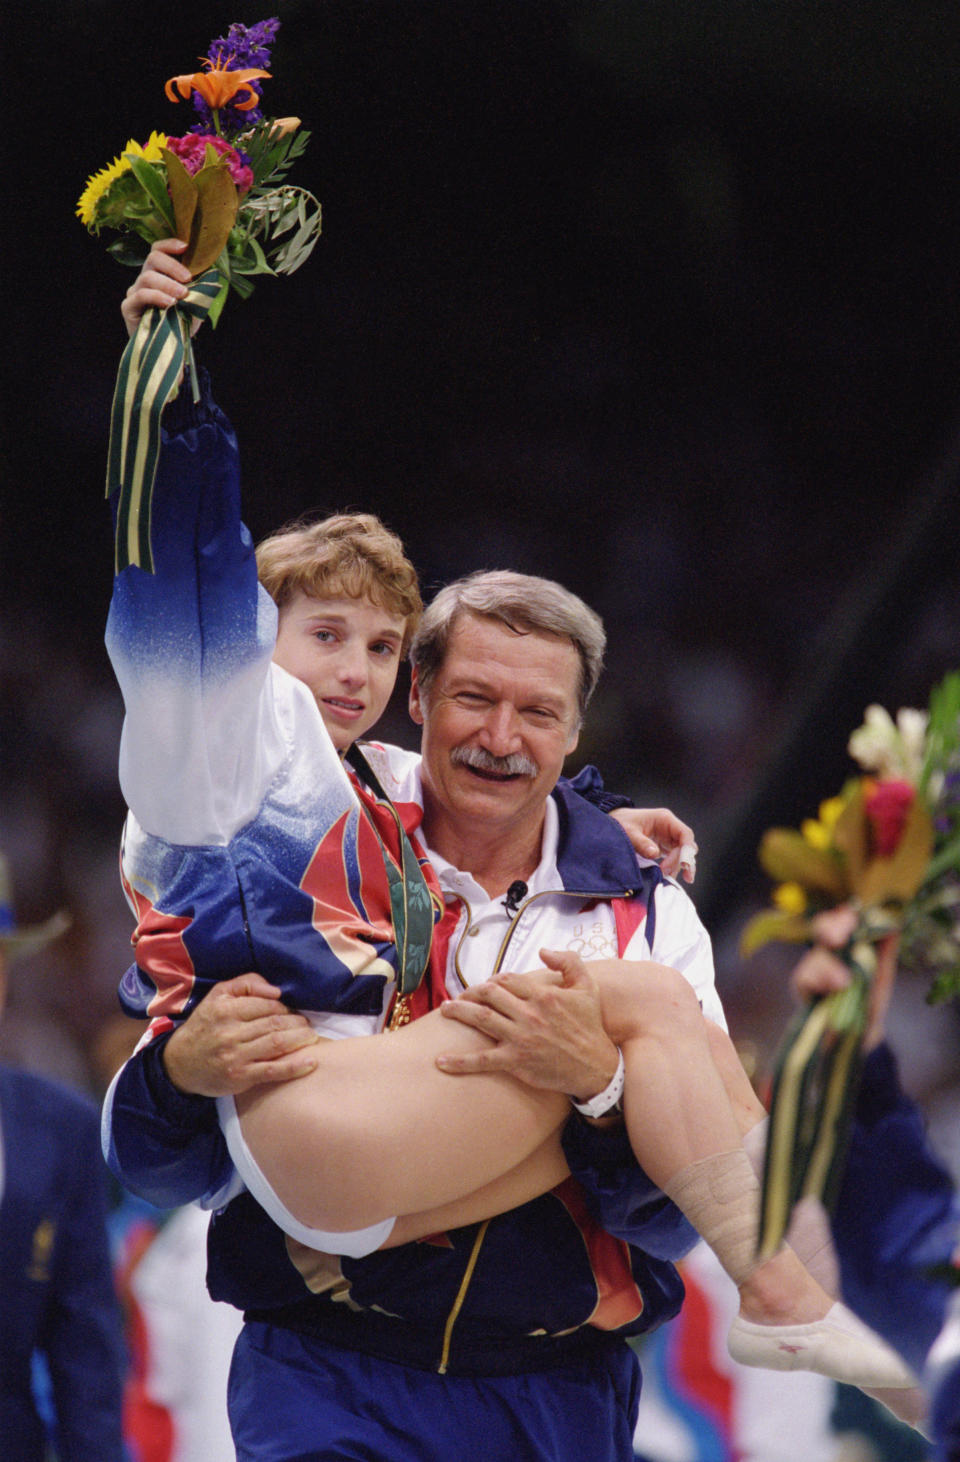 ATLANTA - JULY 23:  Coach Bela Karolyi carries an injured yet triumphant Kerri Strug of the United States after she received her gold medal in the Womens Team Gymnastics competition at the 1996 Olympic Games on July 23, 1996 at the Georgia Dome in Atlanta, Georgia.  (Photo by Doug Pensinger/Getty Images)